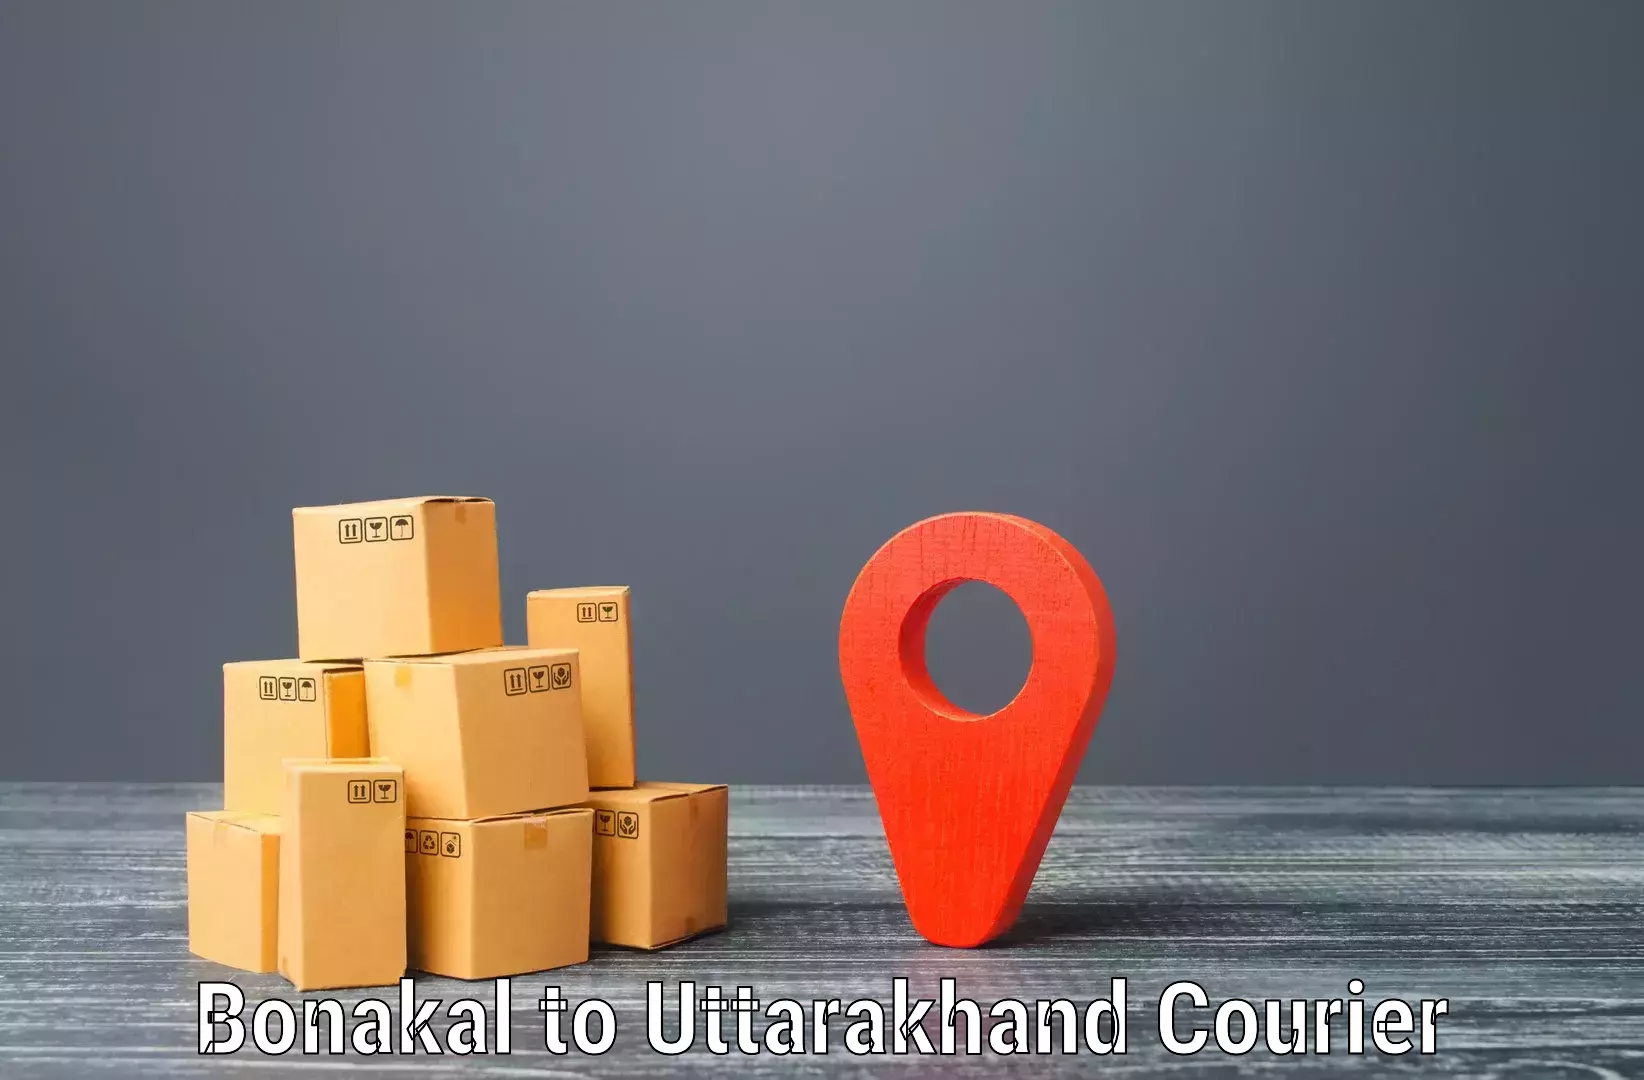 Supply chain delivery in Bonakal to Ranikhet